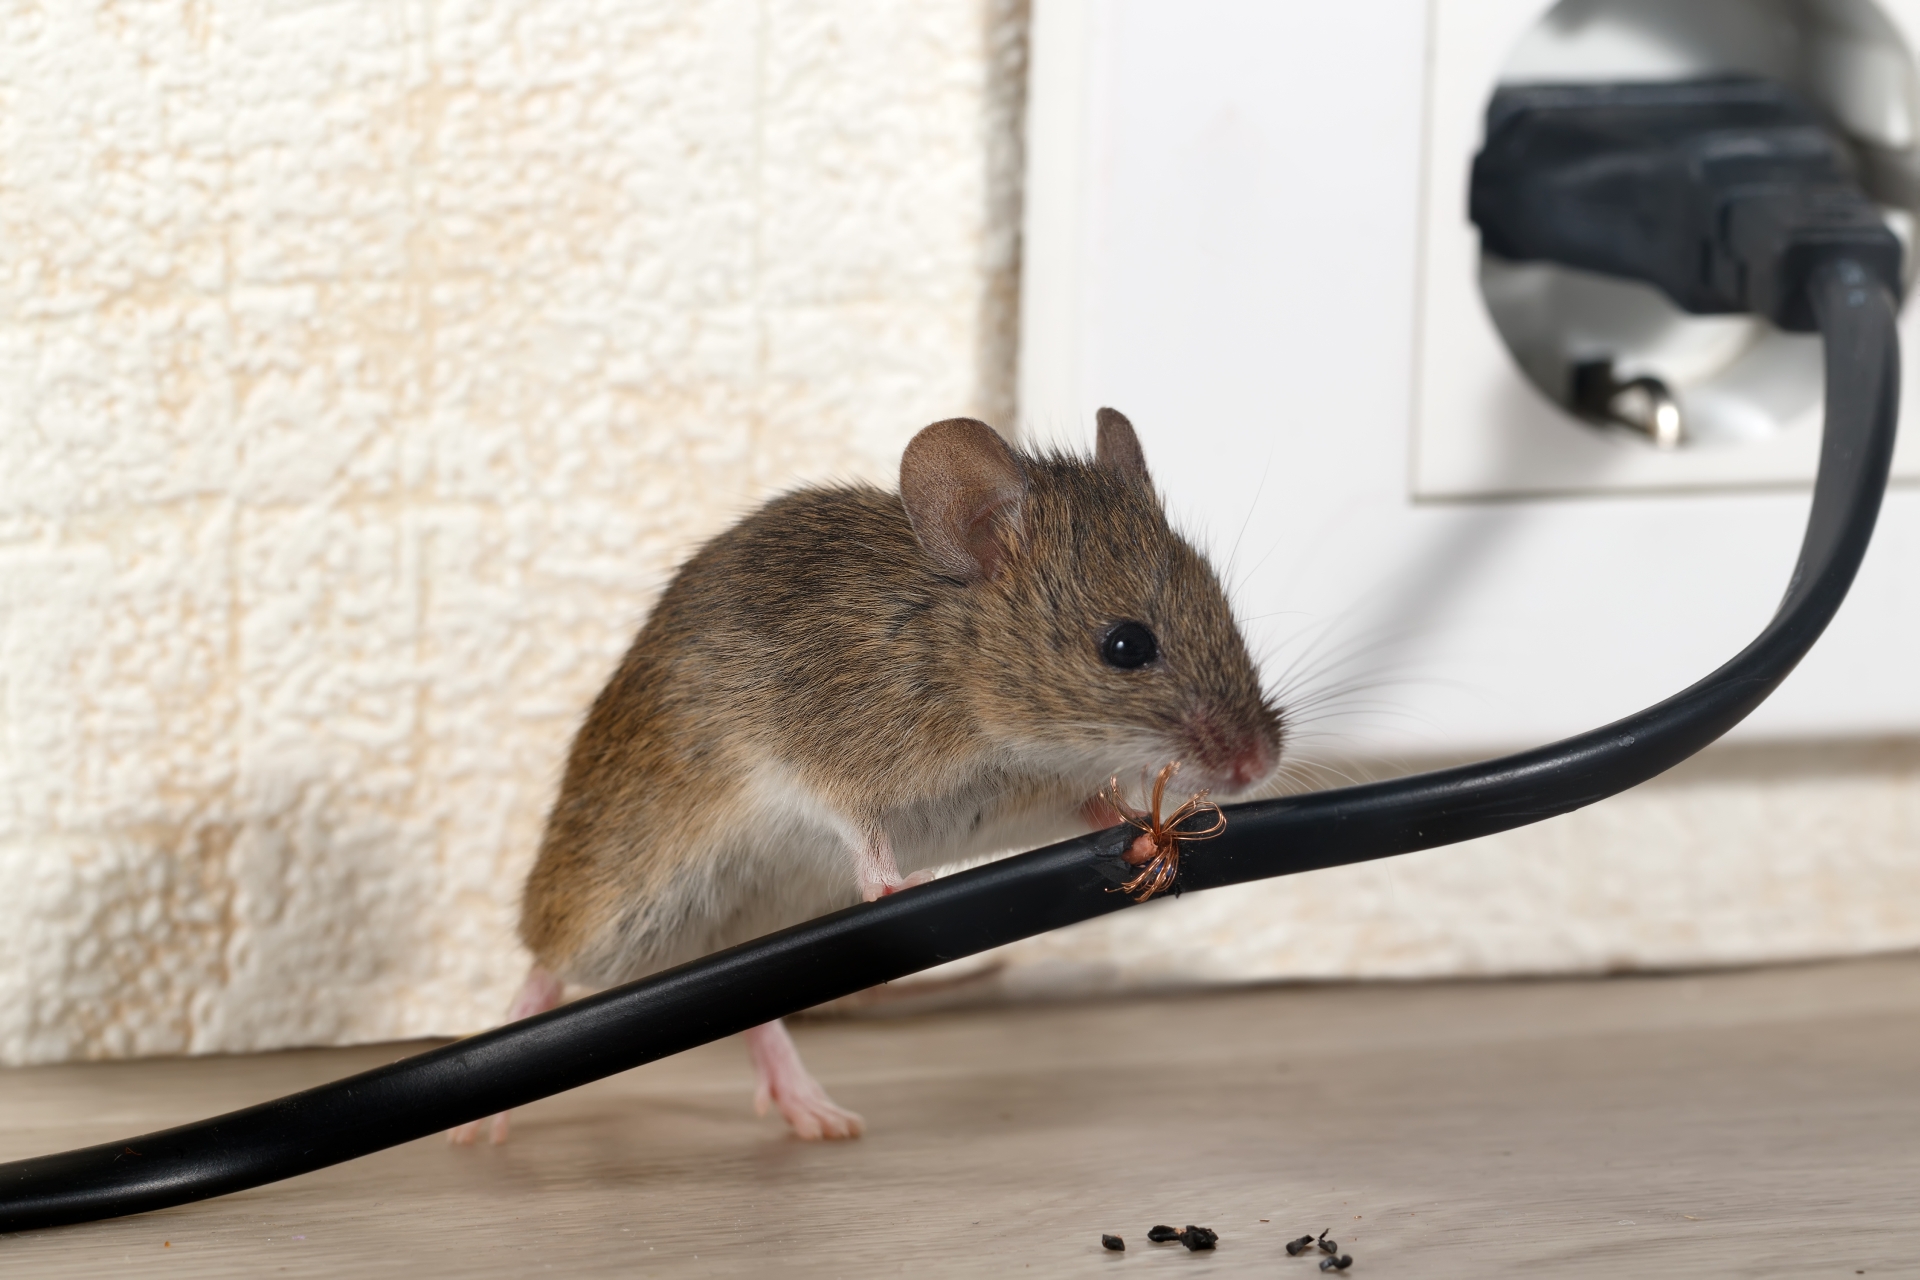 Mice Infestation, Pest Control in Potters Bar, Cuffley, Northaw, EN6. Call Now 020 8166 9746